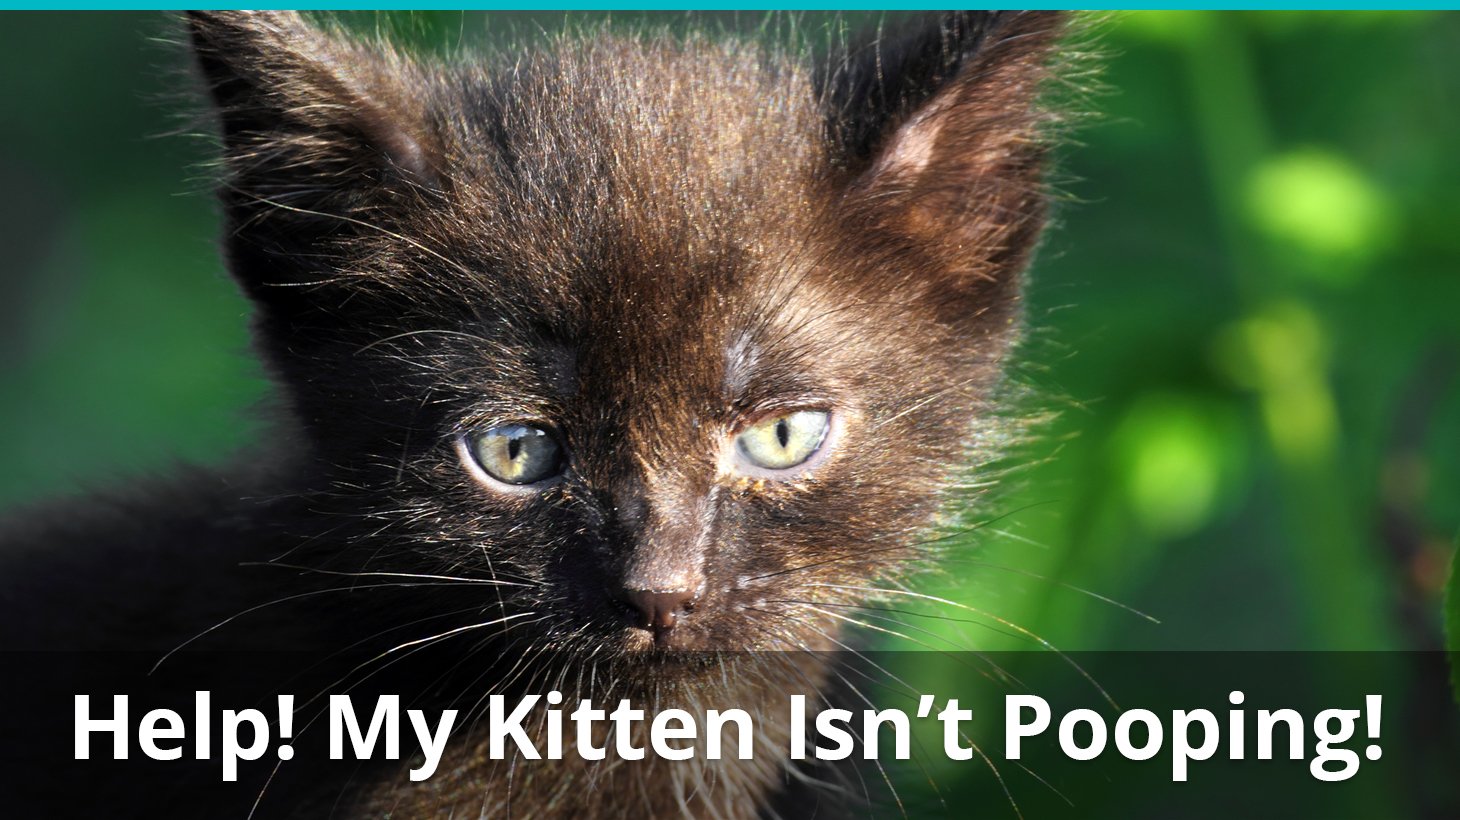 Help! My Cat Or Kitten Isn't Pooping! Why Isn't It, And How To Help It